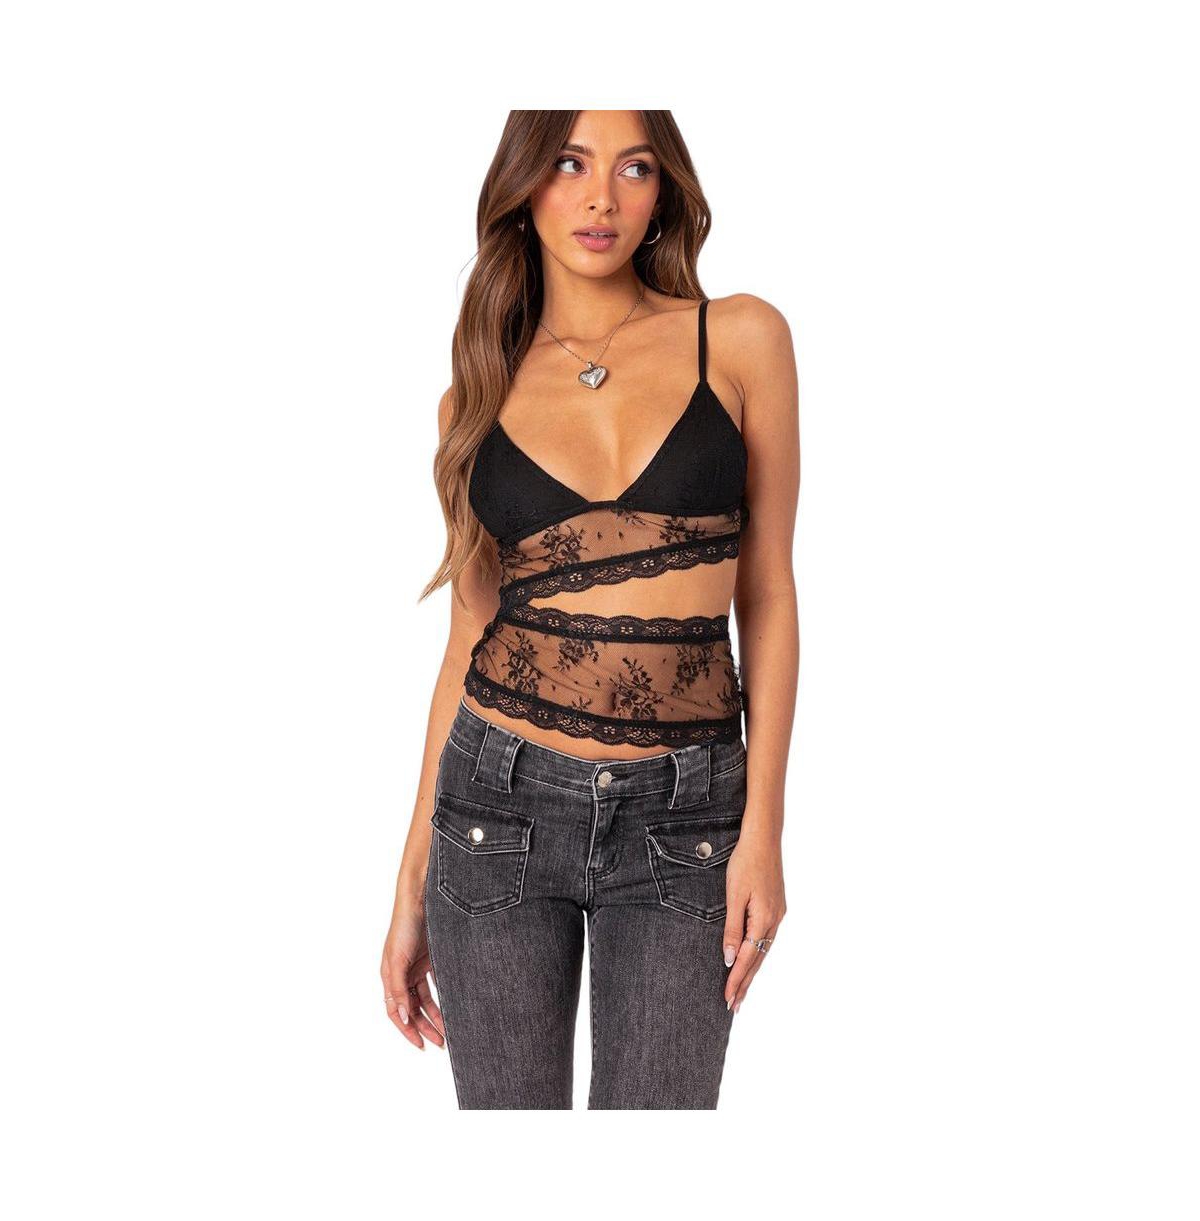 Women's Spice Cut Out Sheer Lace Tank Top - Black